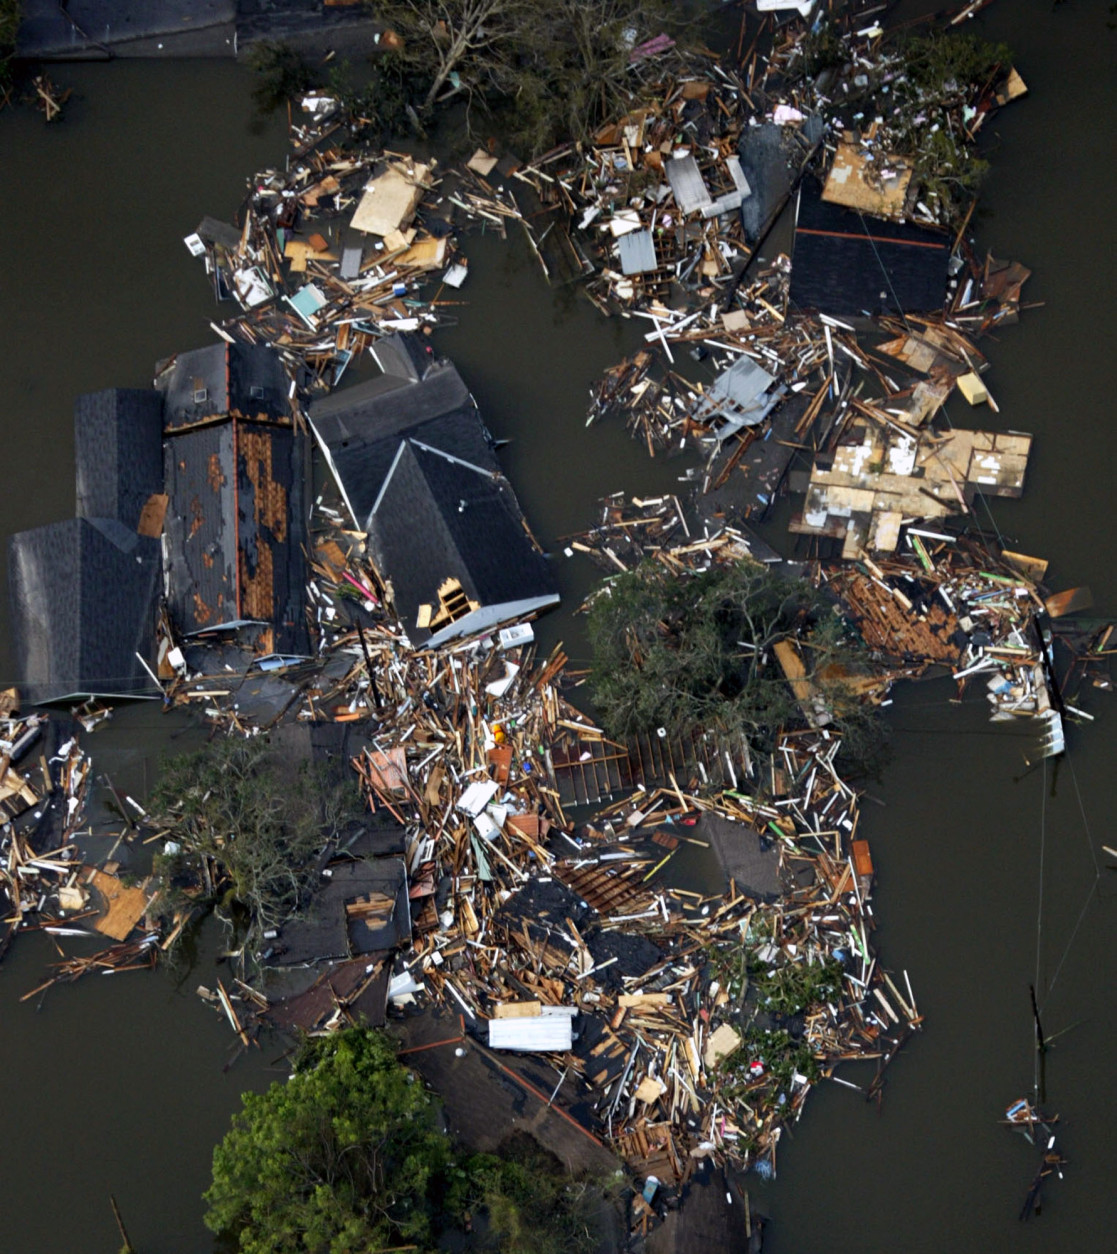 Homes destroyed by Hurricane Katrina are shown in this aerial view, Tuesday, Aug. 30, 2005, in New Orleans. (AP Photo/David J. Phillip)